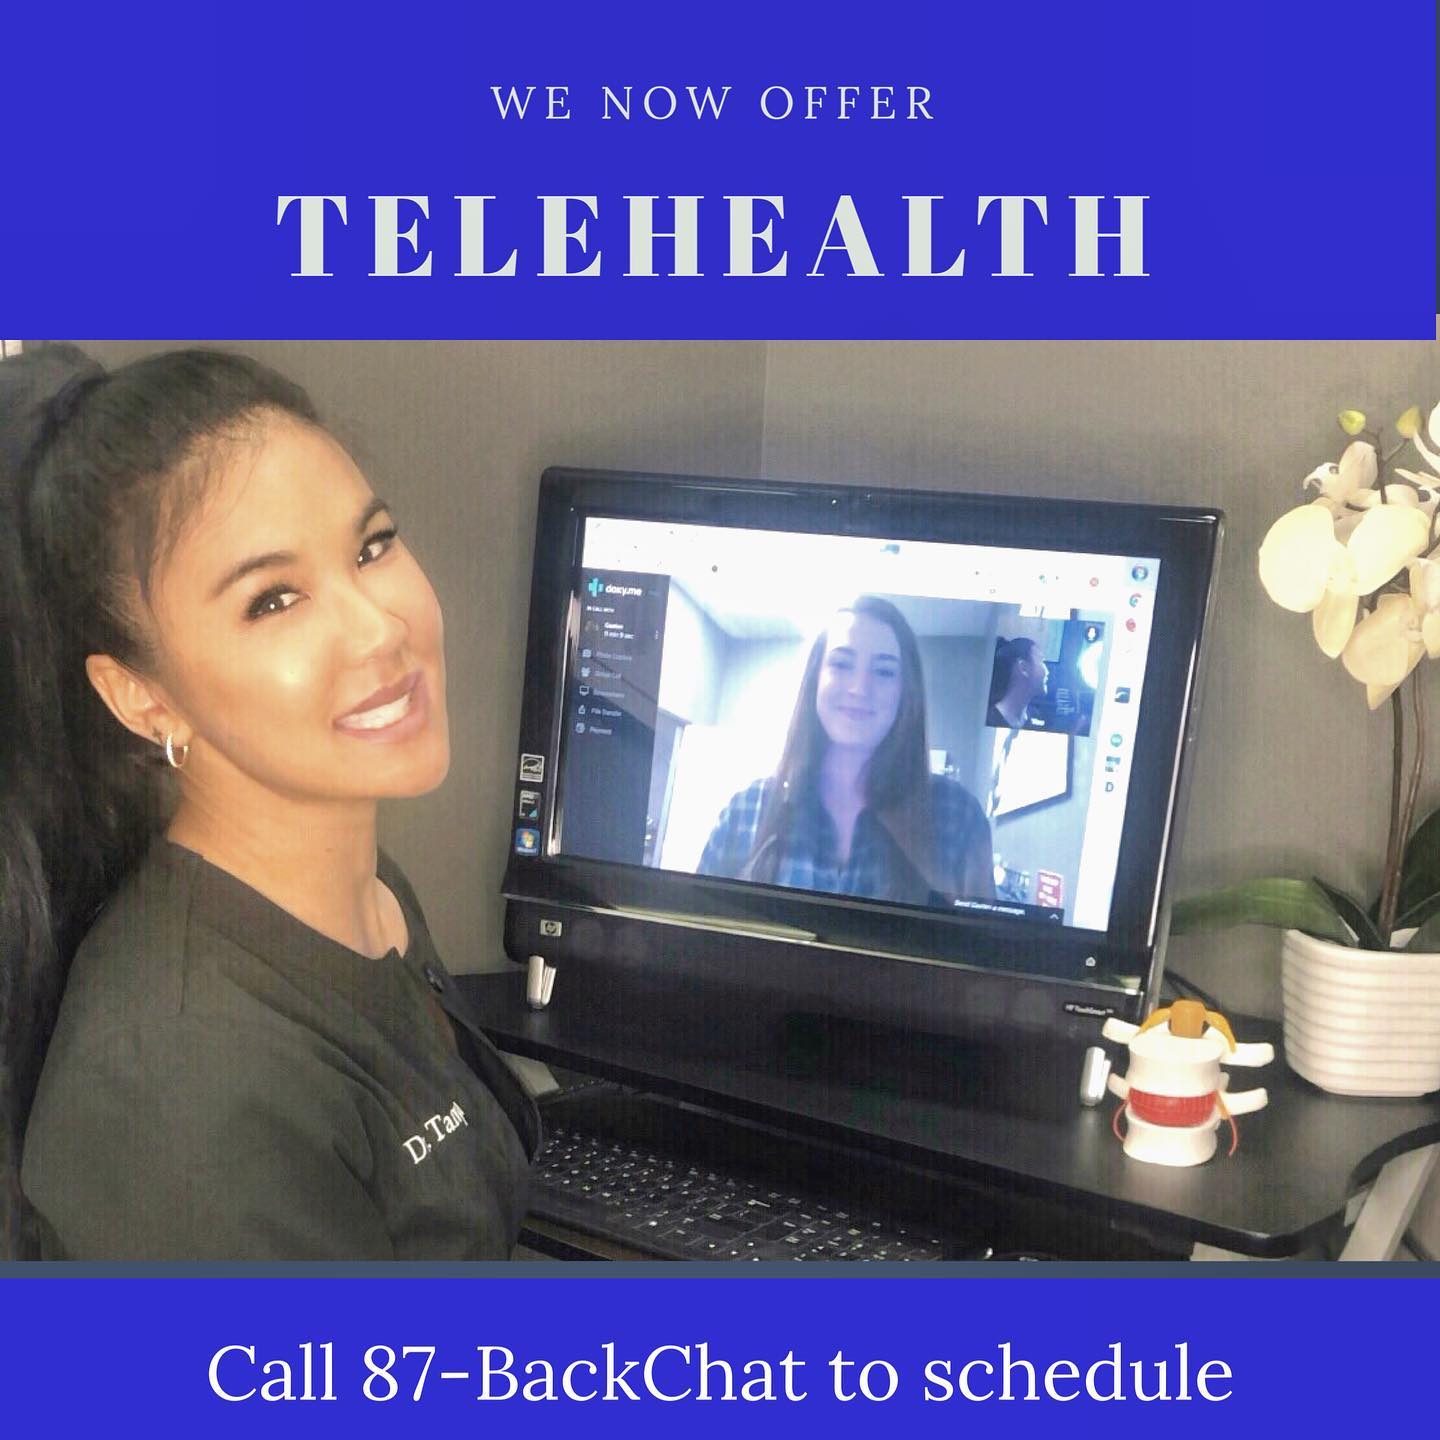 Call 87-BackChat to schedule!